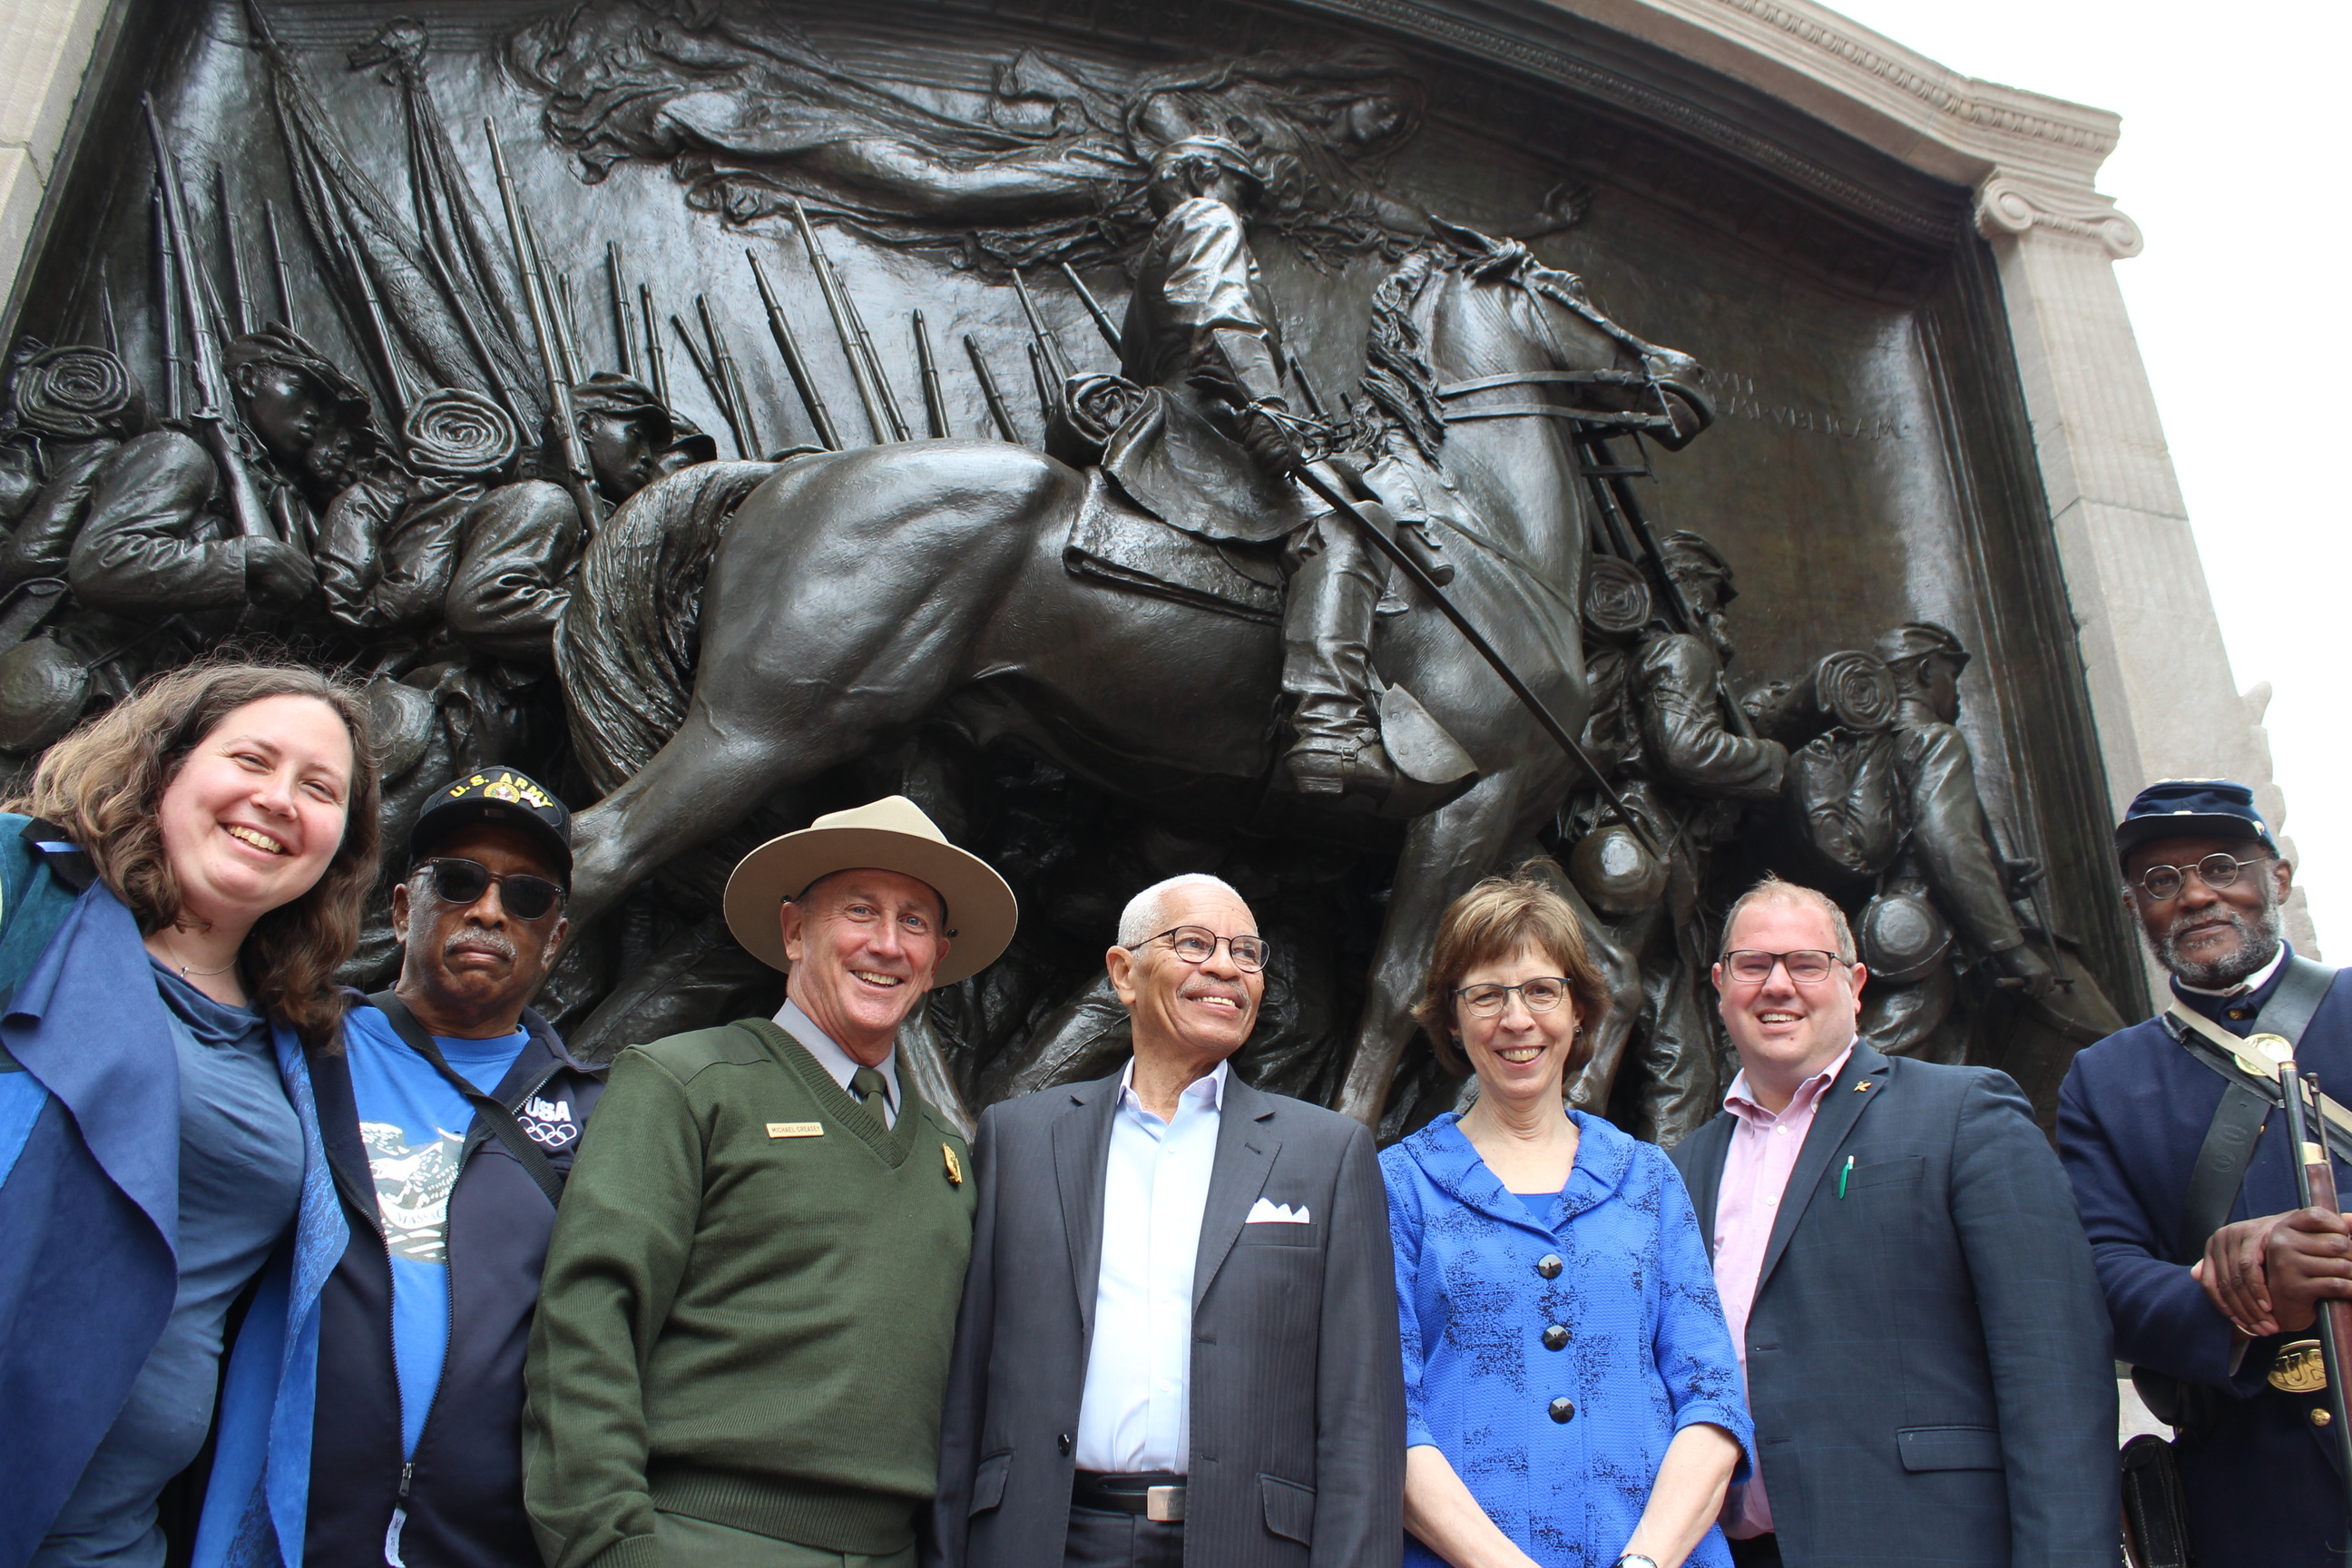 Members of the Partnership to Renew the Shaw/54th Memorial standing in front of the restored Memorial.